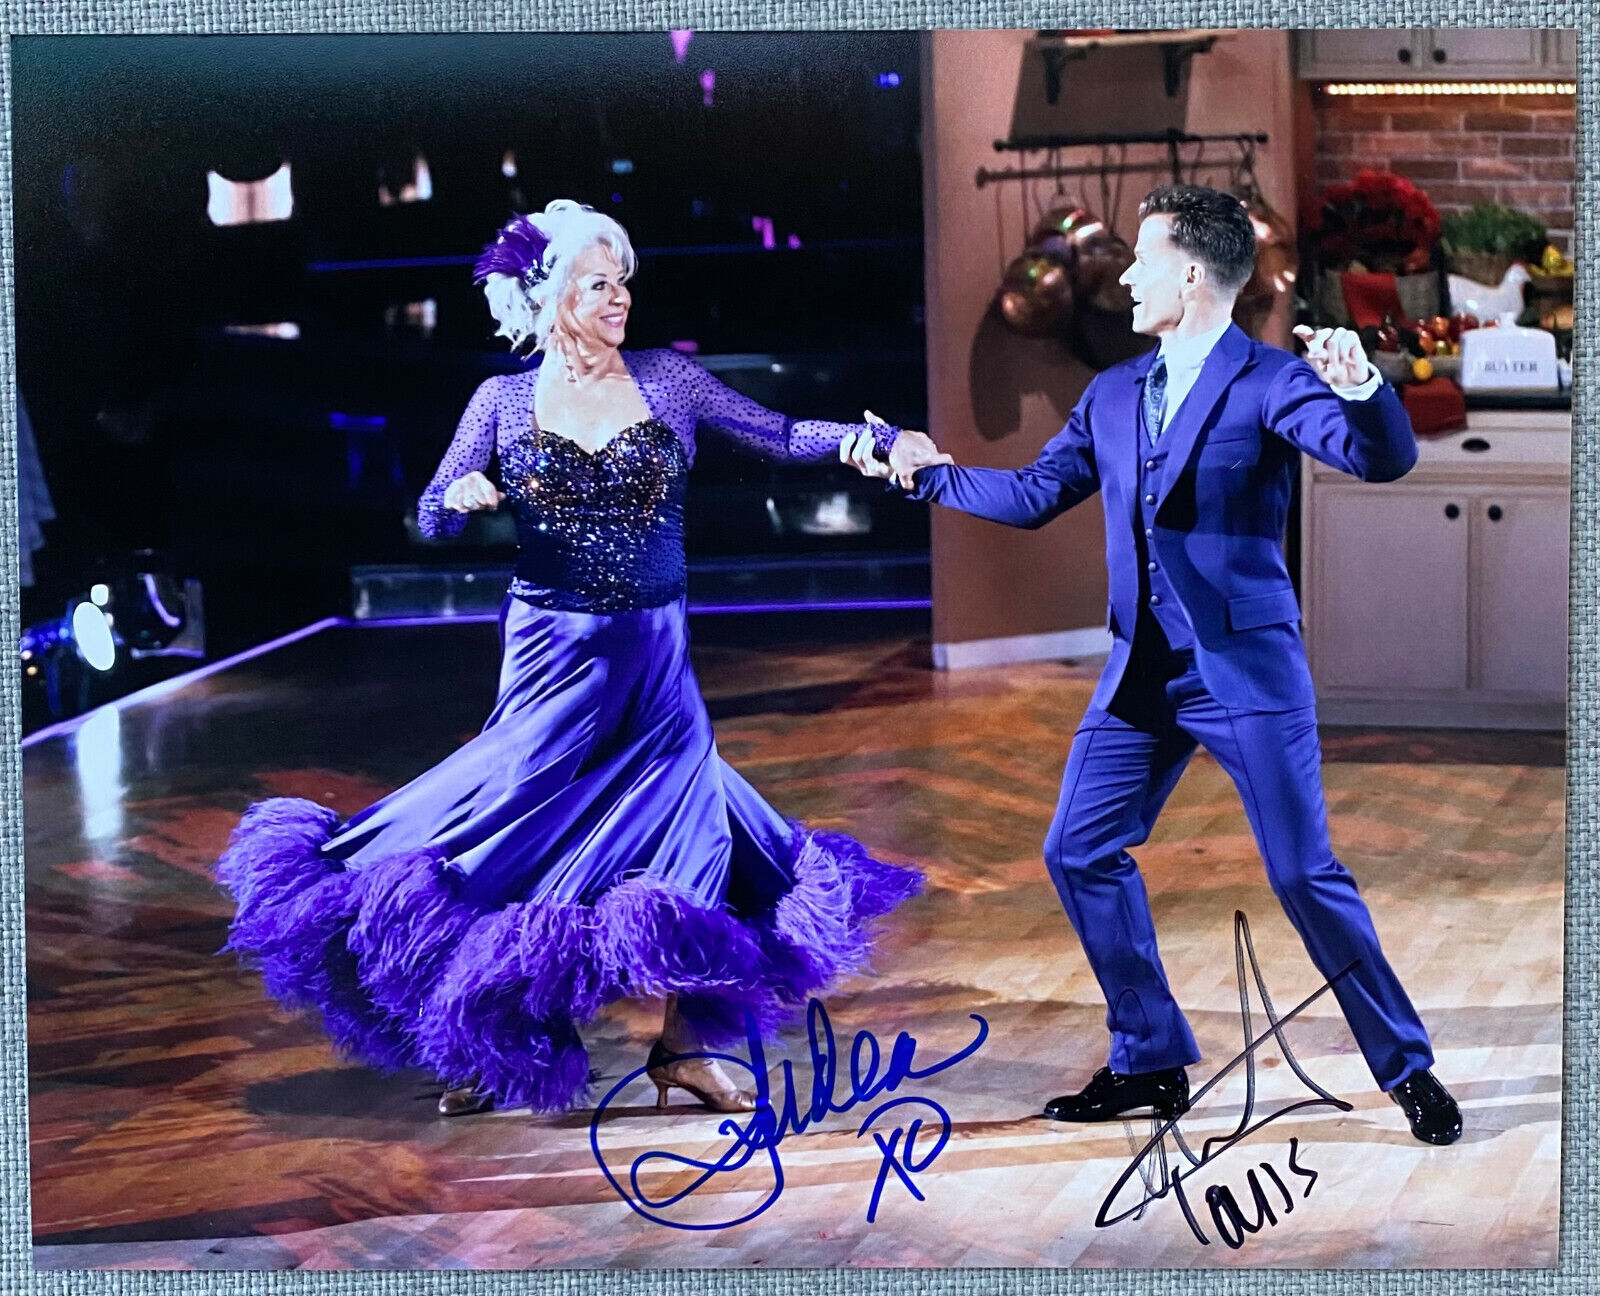 Paula Deen Signed & Louis Van Amstel Signed 8x10 Photo - Dancing With The Stars